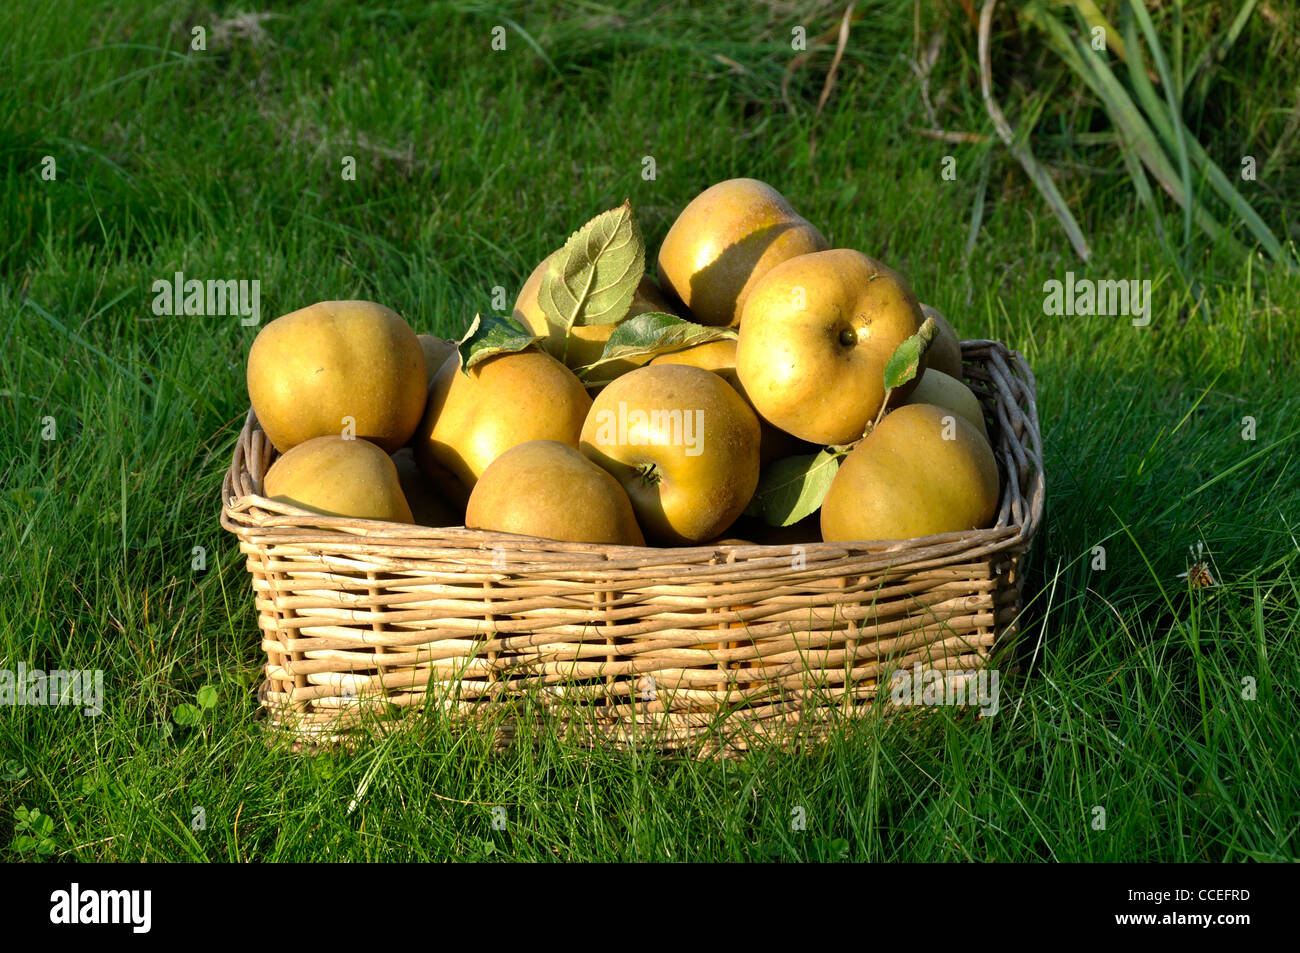 Russet apples (Reinette grise du Canada) in a basket on the lawn of the garden. Stock Photo